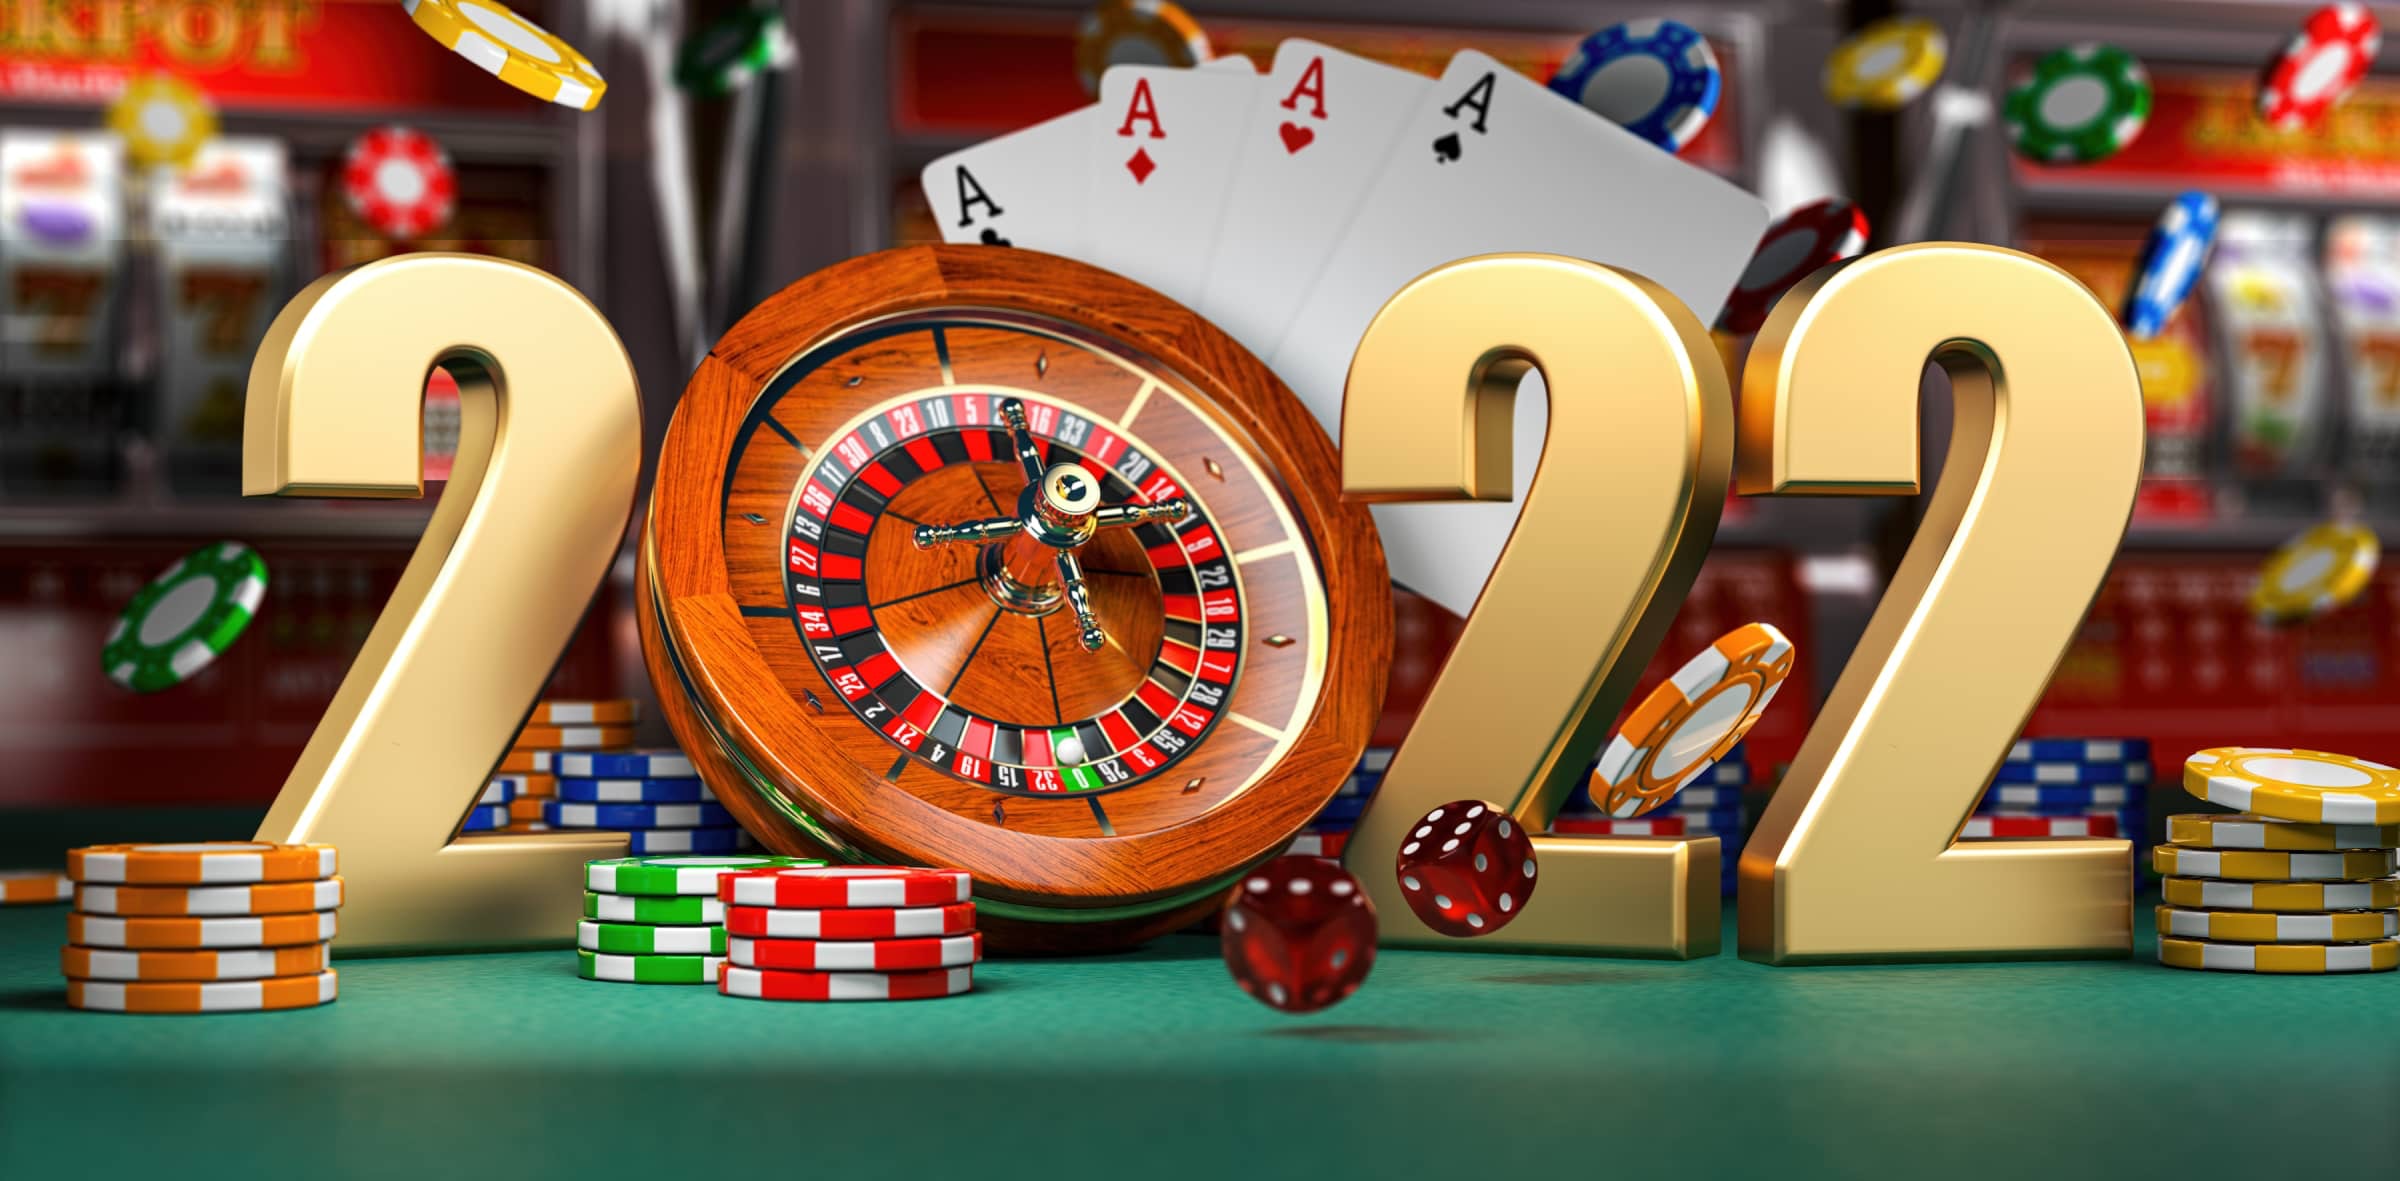 Casino Strategy 2022 - How to Win Big at Casino Online